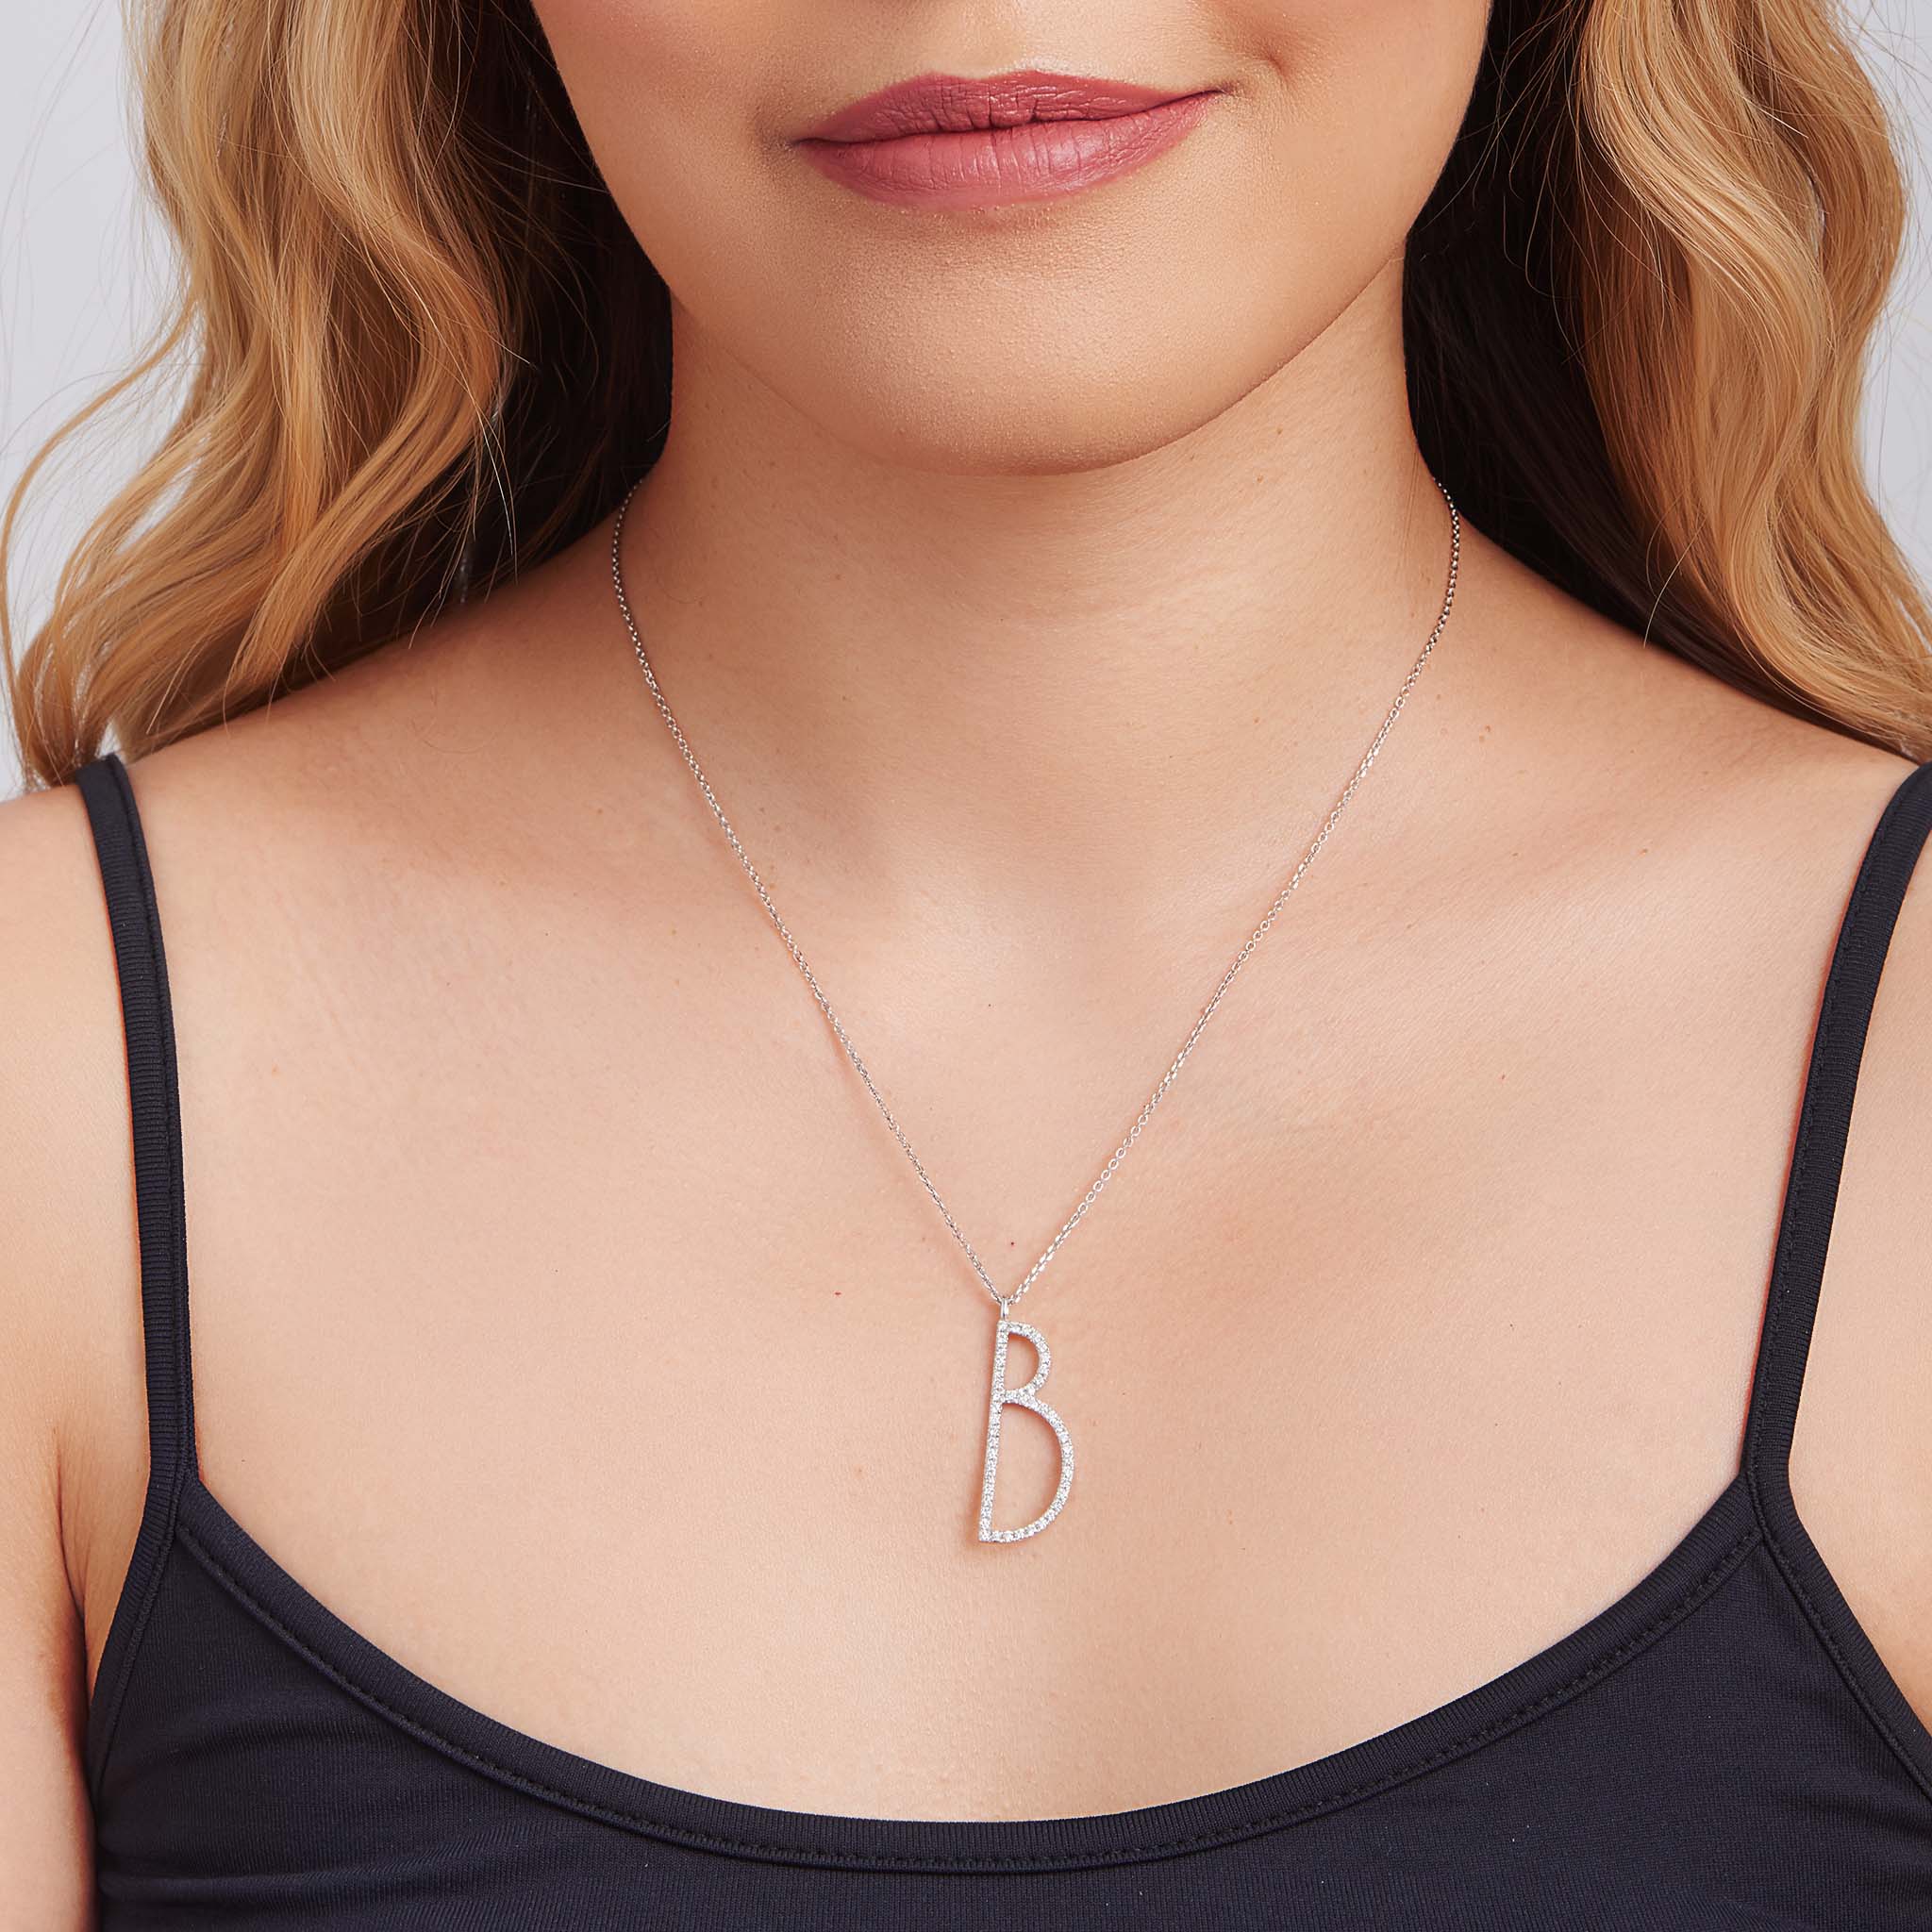 Design silver necklace with letter 